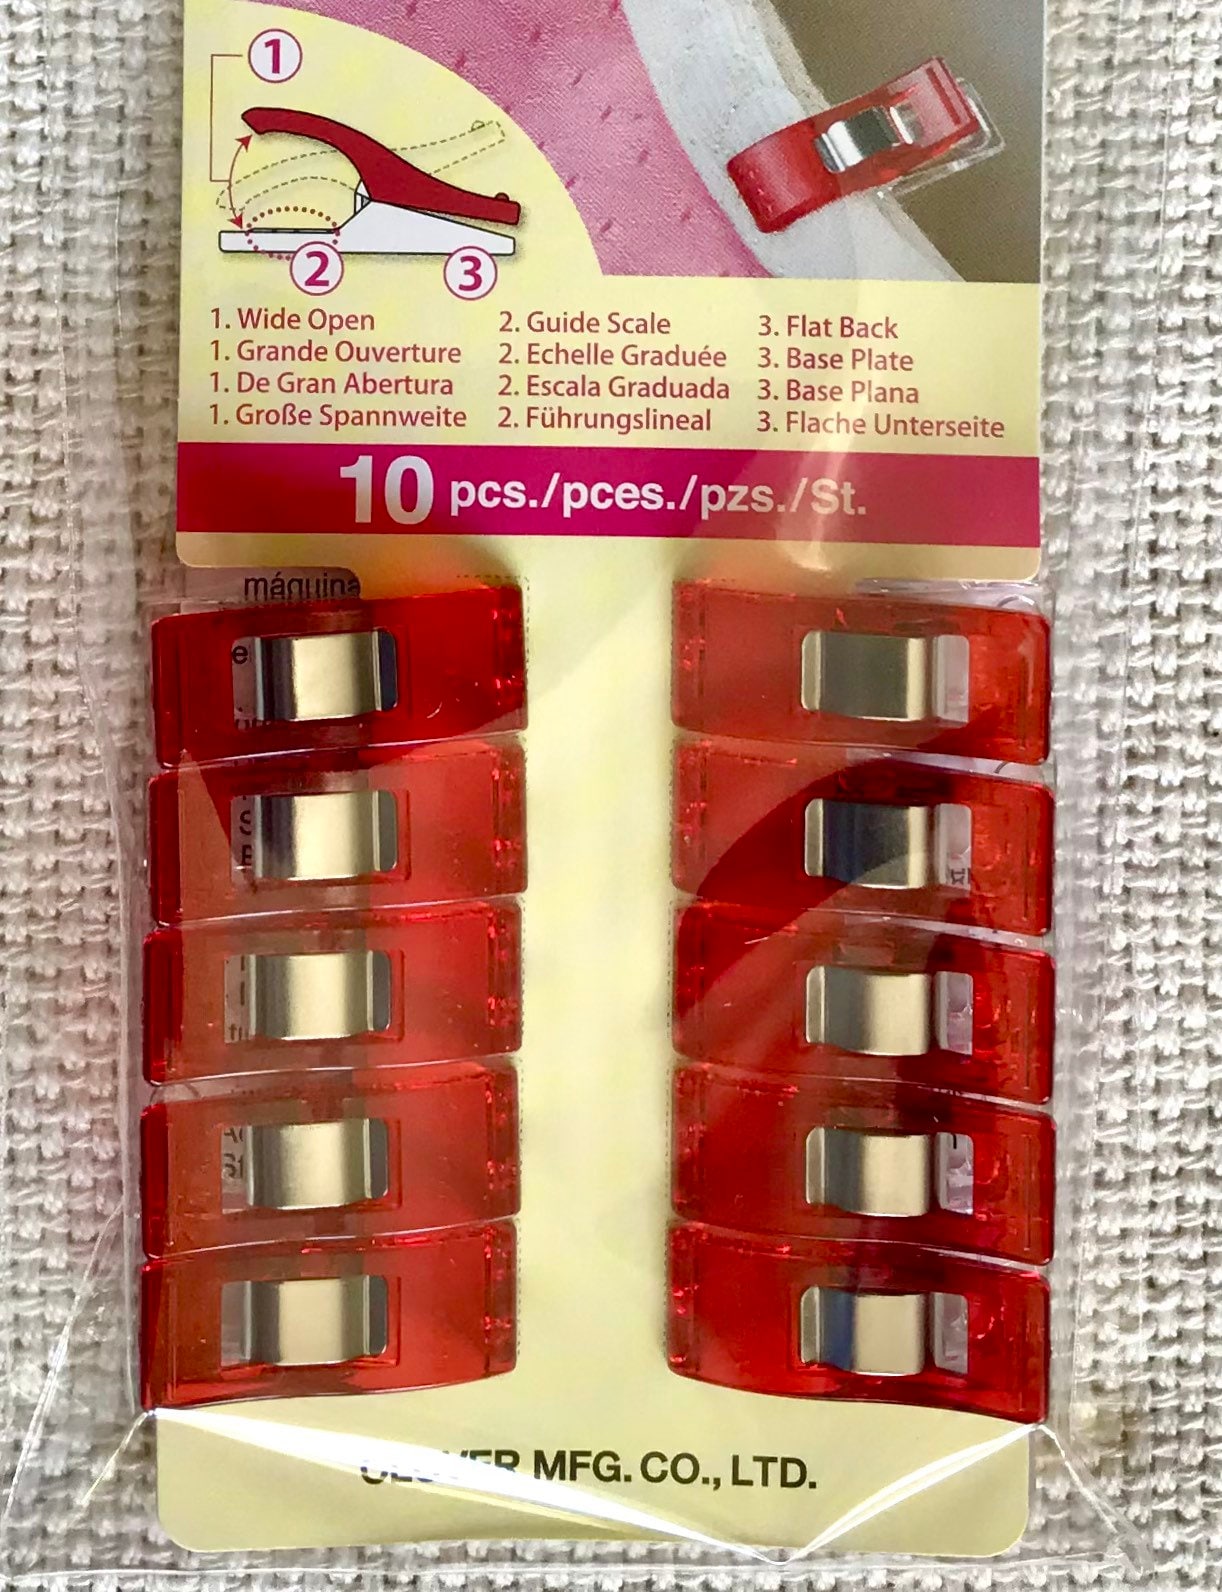 Needlepoint Brass Thumb Tacks with Remover